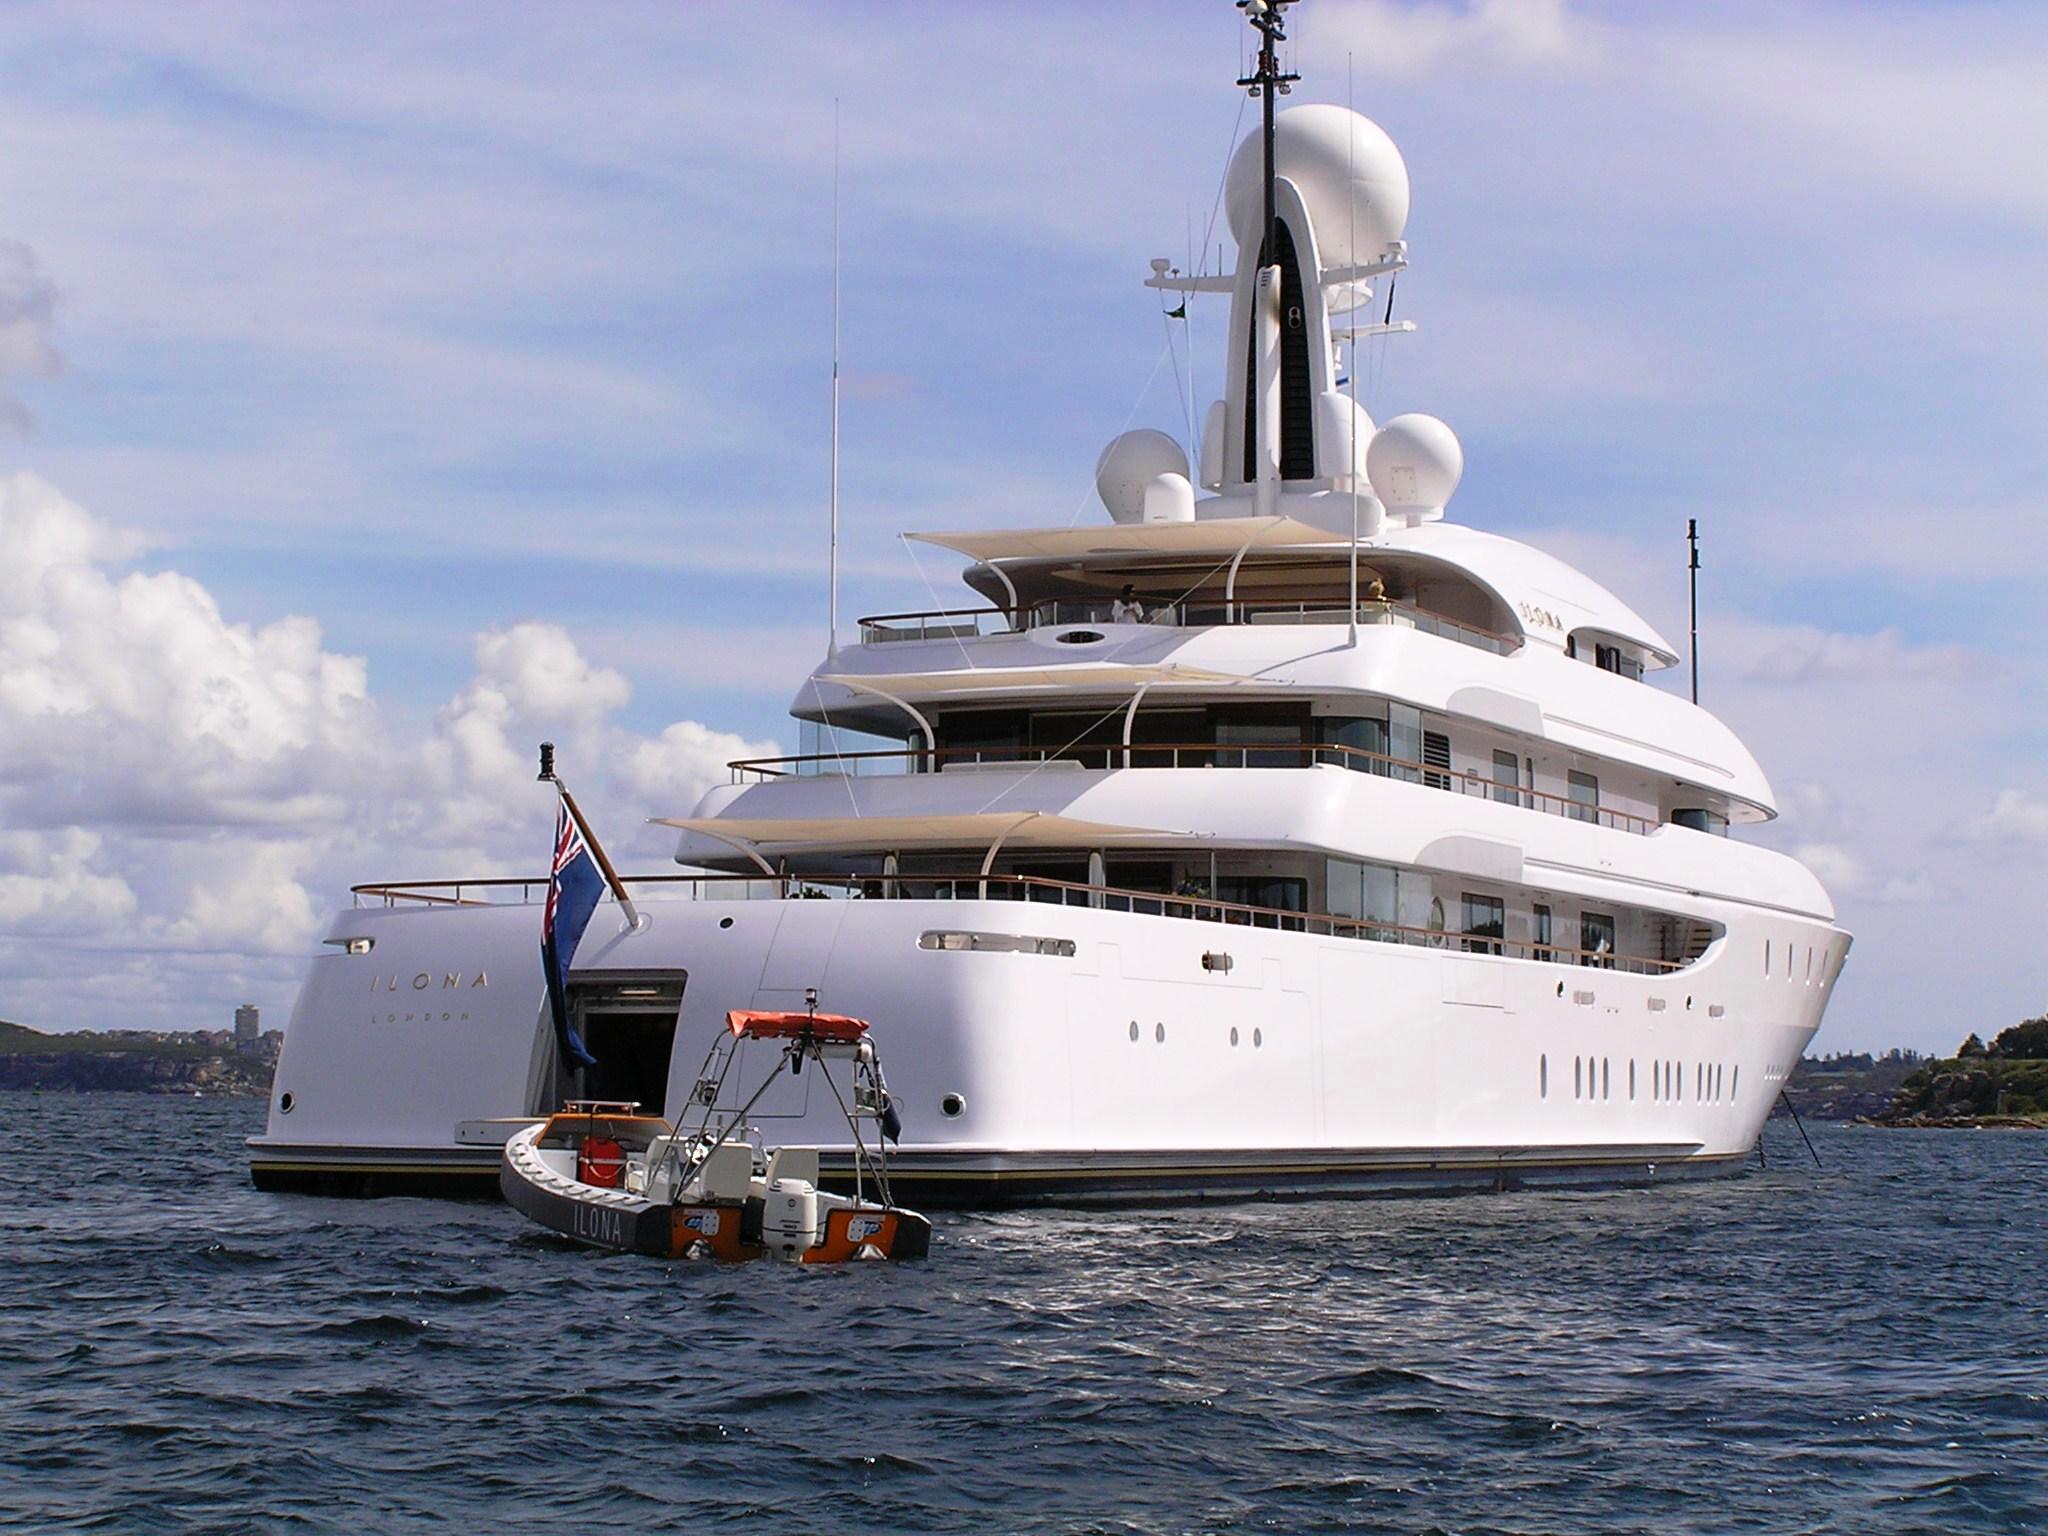 who owns the yacht ilona